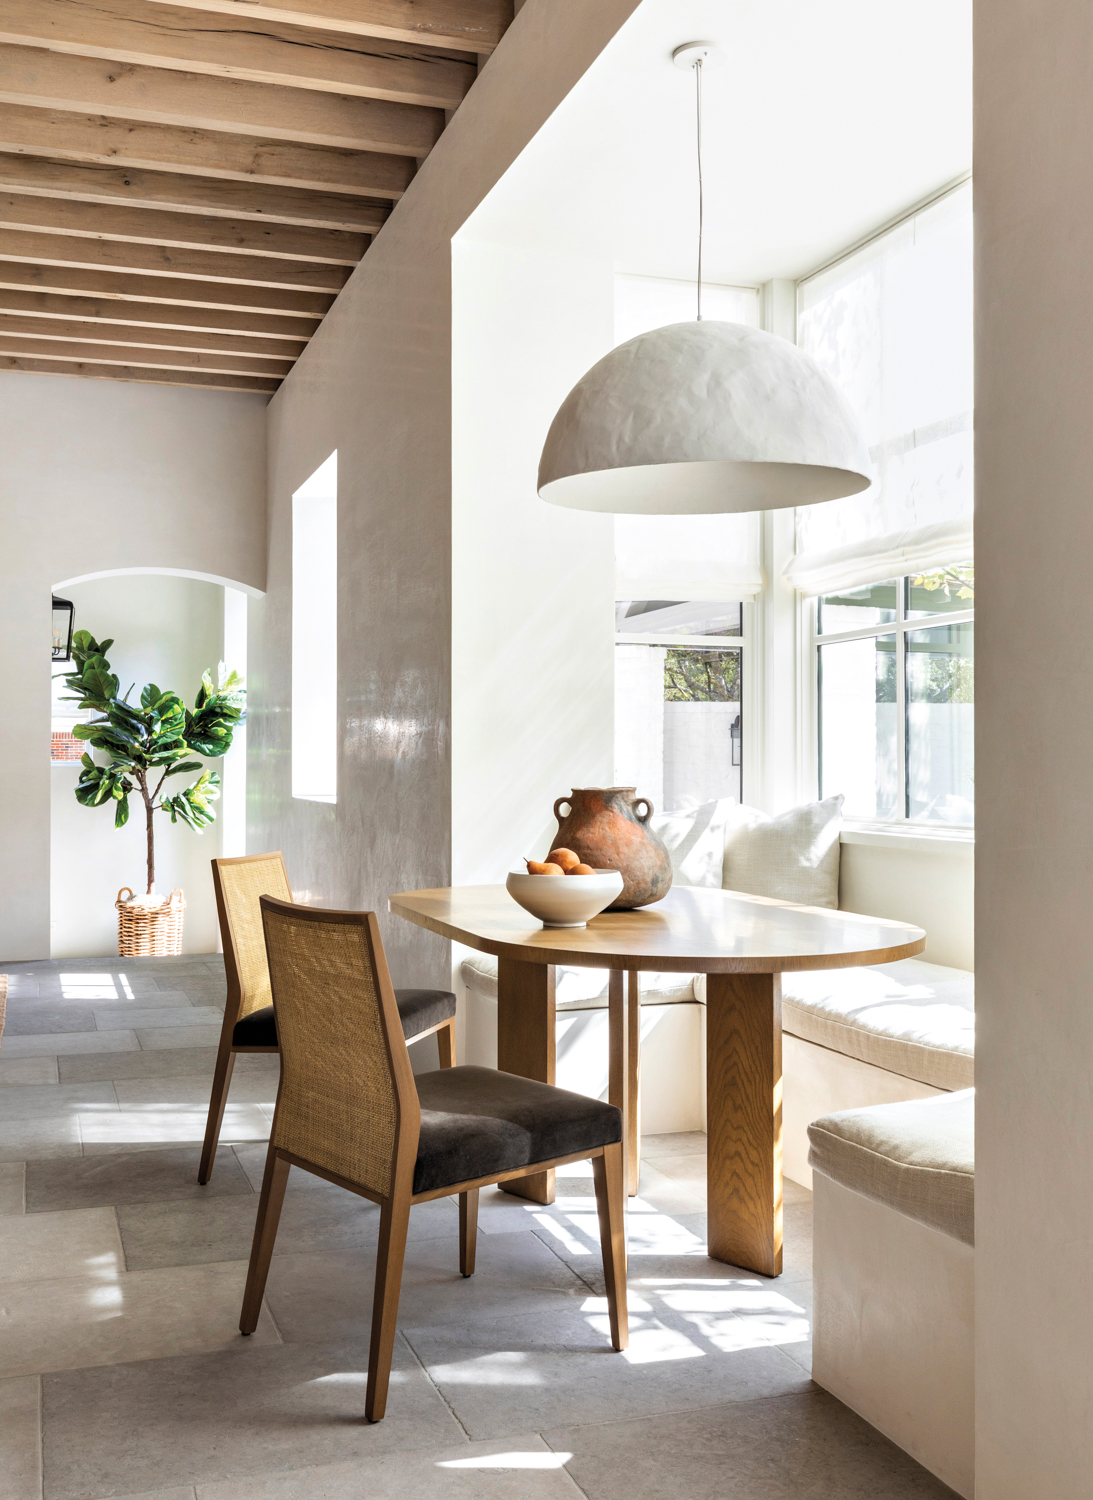 banquette area with pendant light